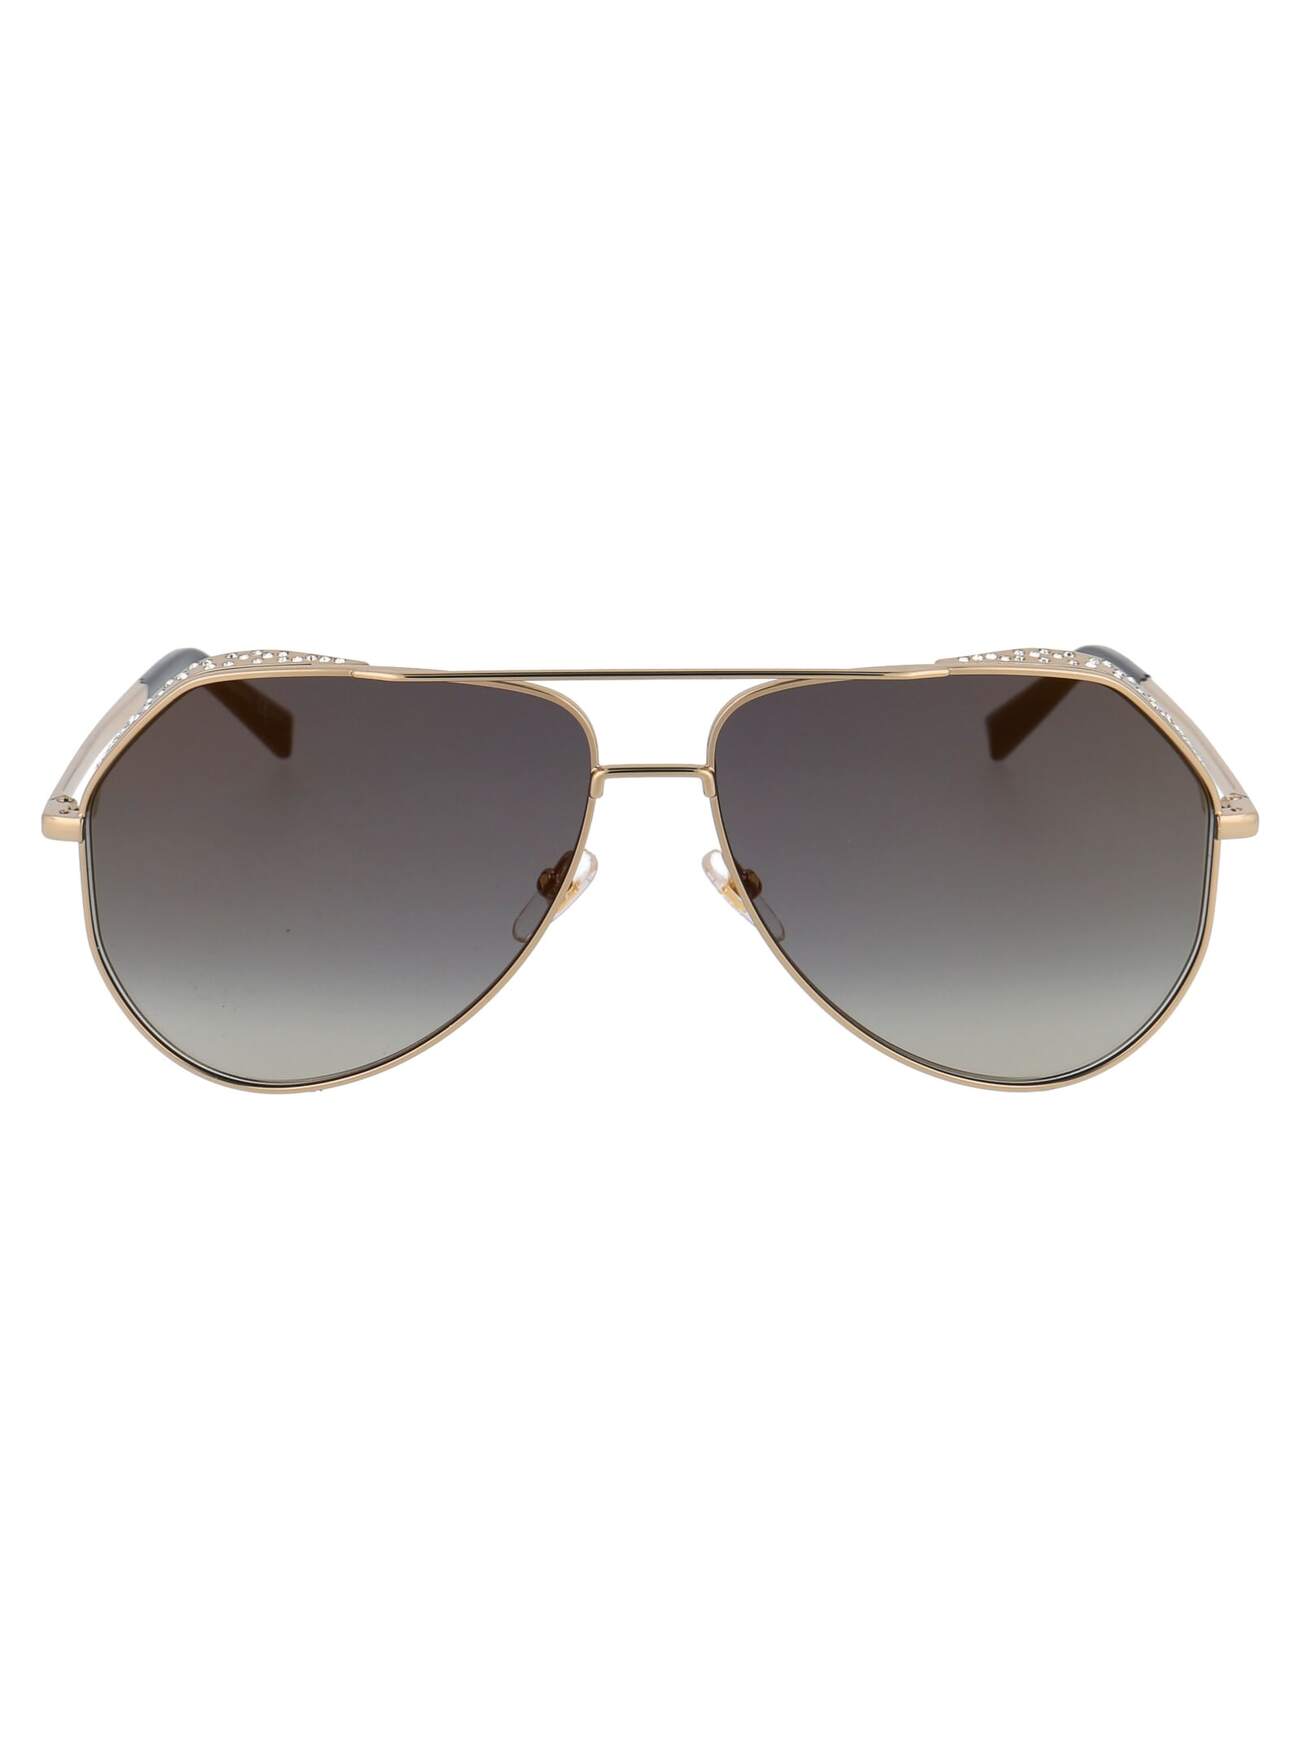 Givenchy Eyewear Gv 7185/g/s Sunglasses in gold